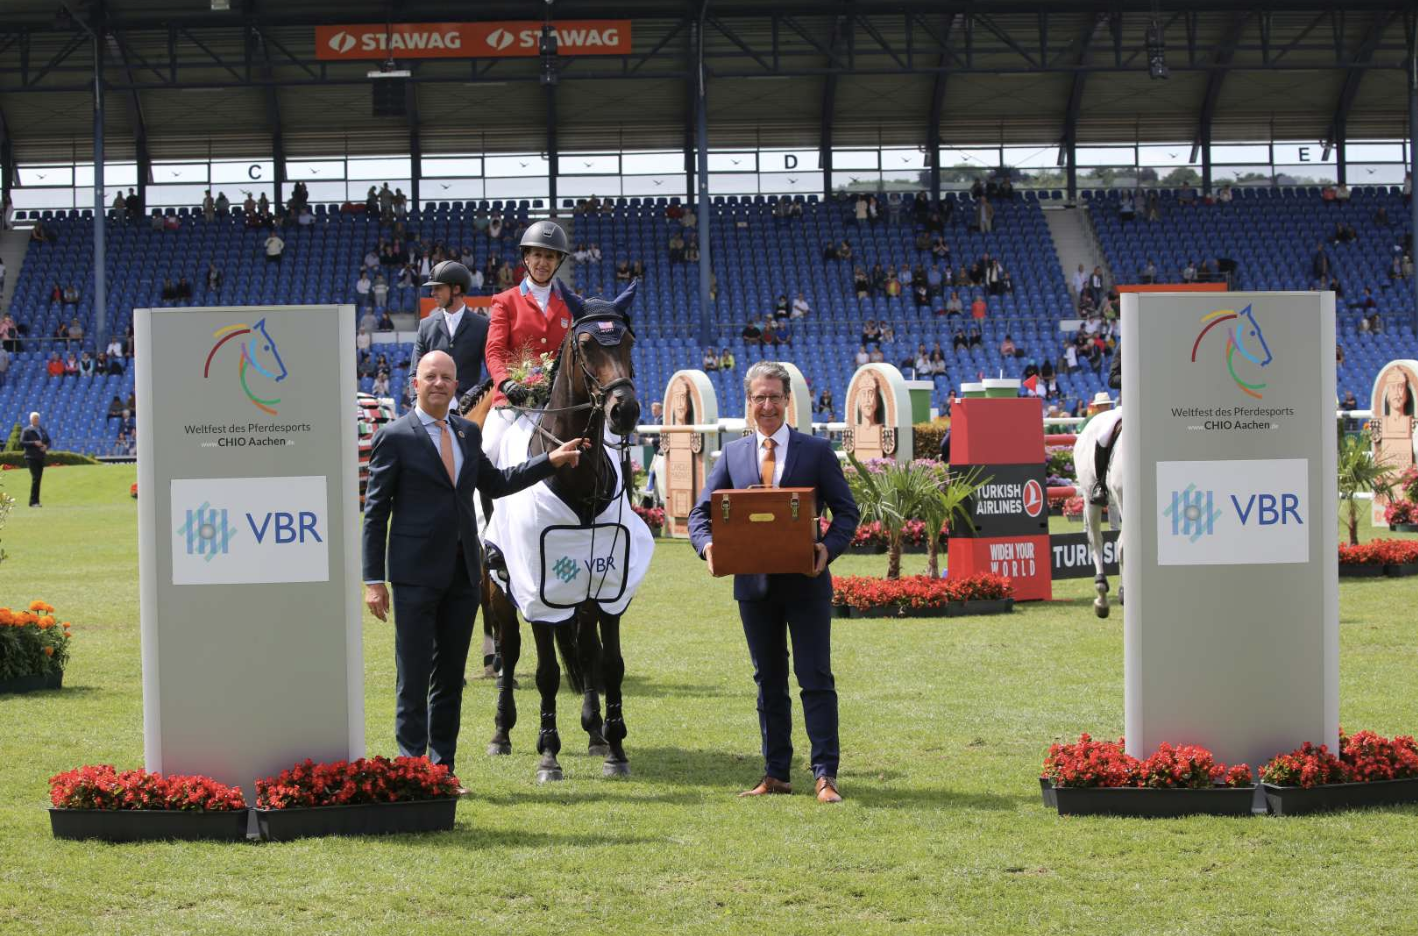 Laura Kraut and Haley win the VBR-Prize at CHIO Aachen: "Her heart is definitely just as big as she is"